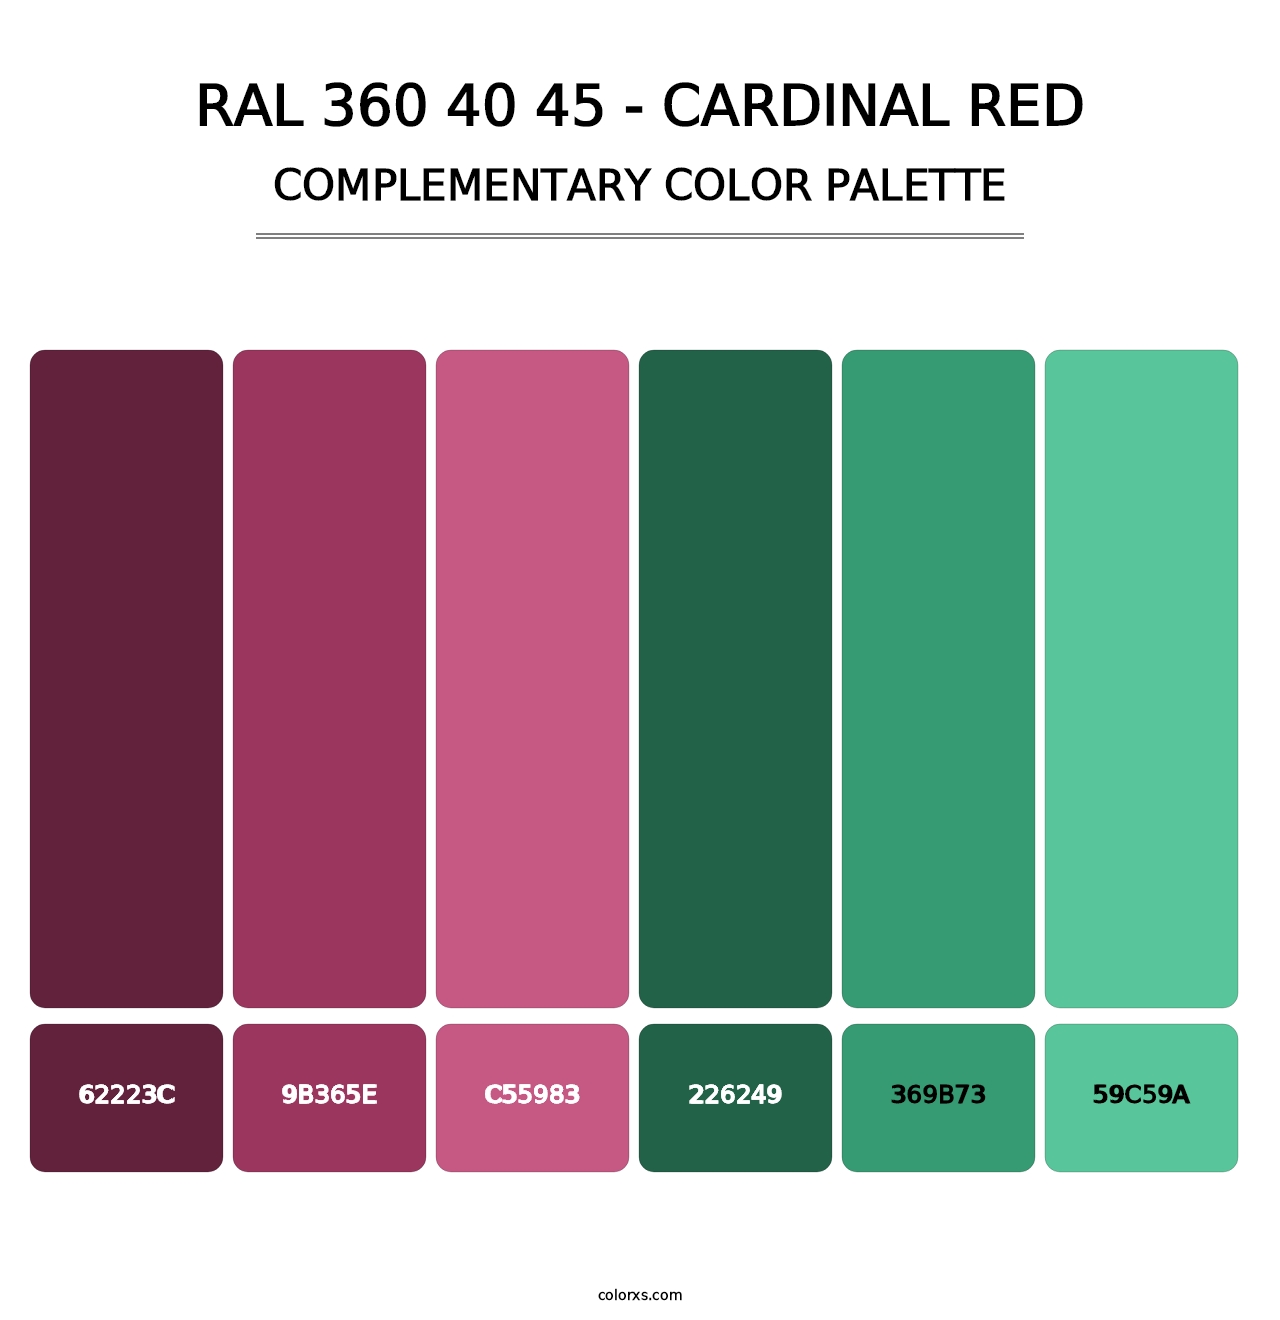 RAL 360 40 45 - Cardinal Red - Complementary Color Palette